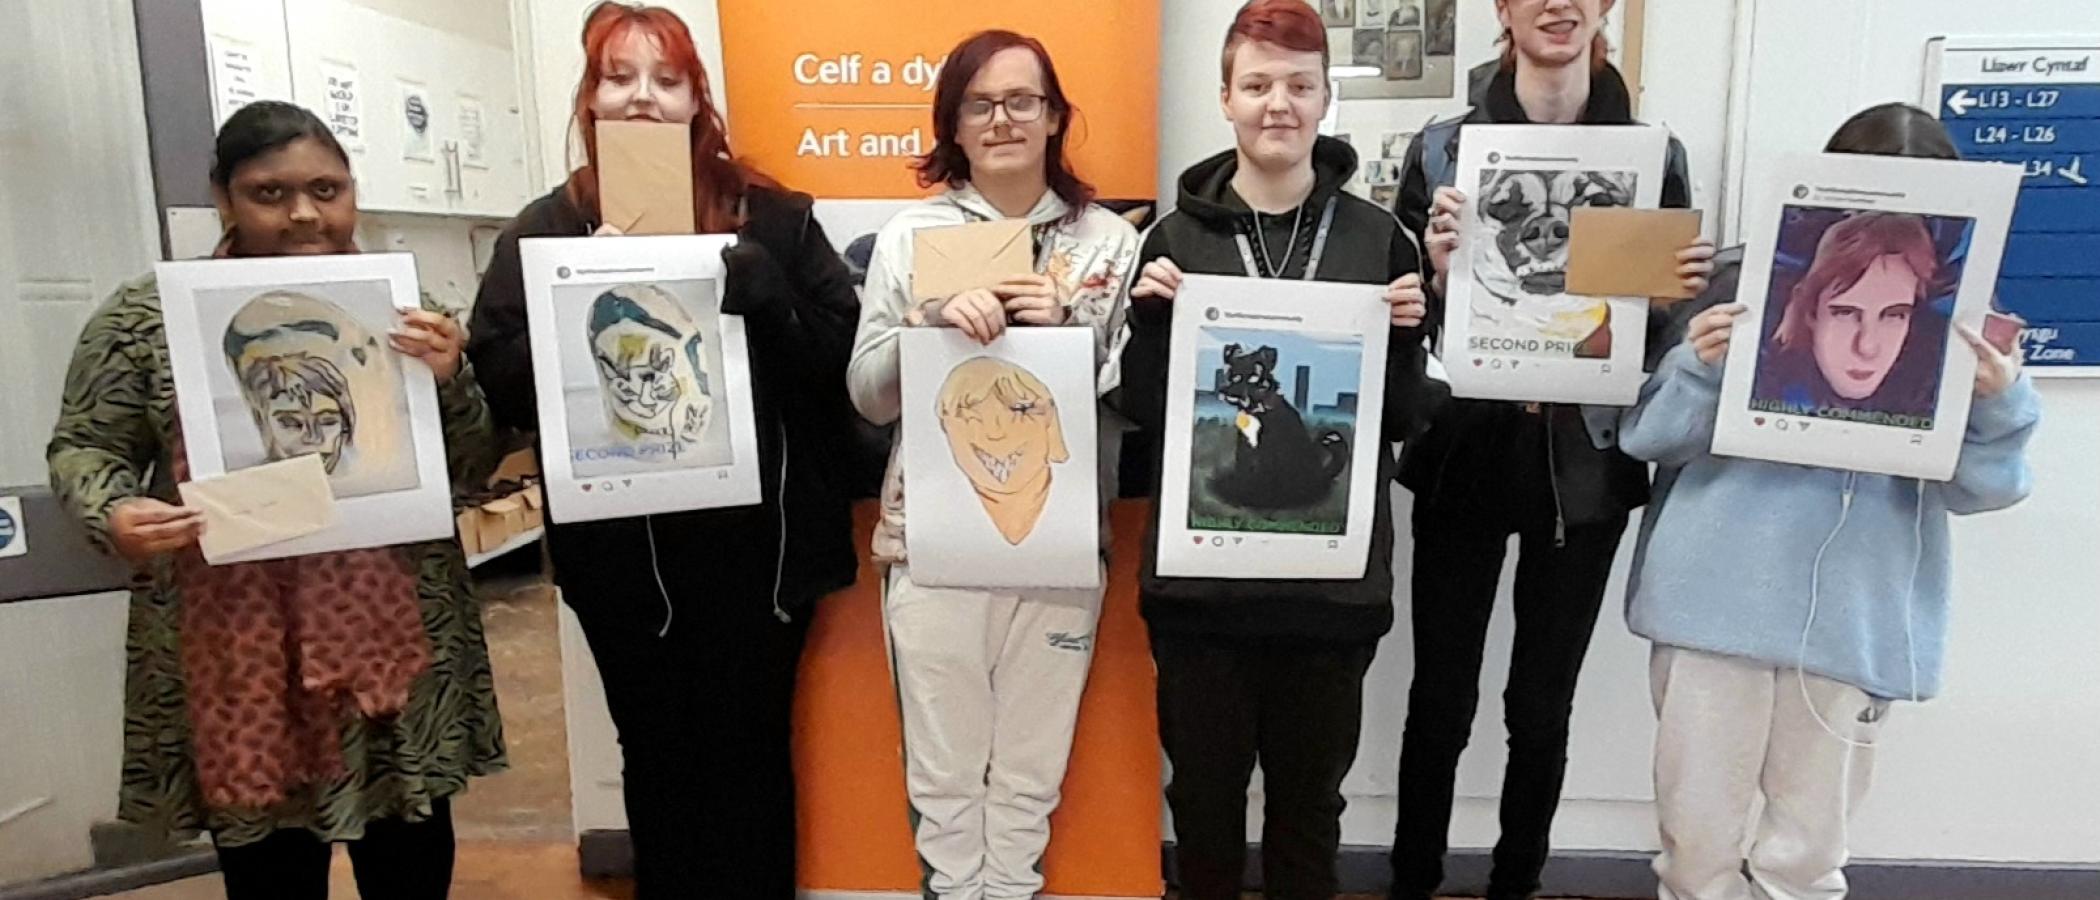 Six of the winning learners, holding up their portraits